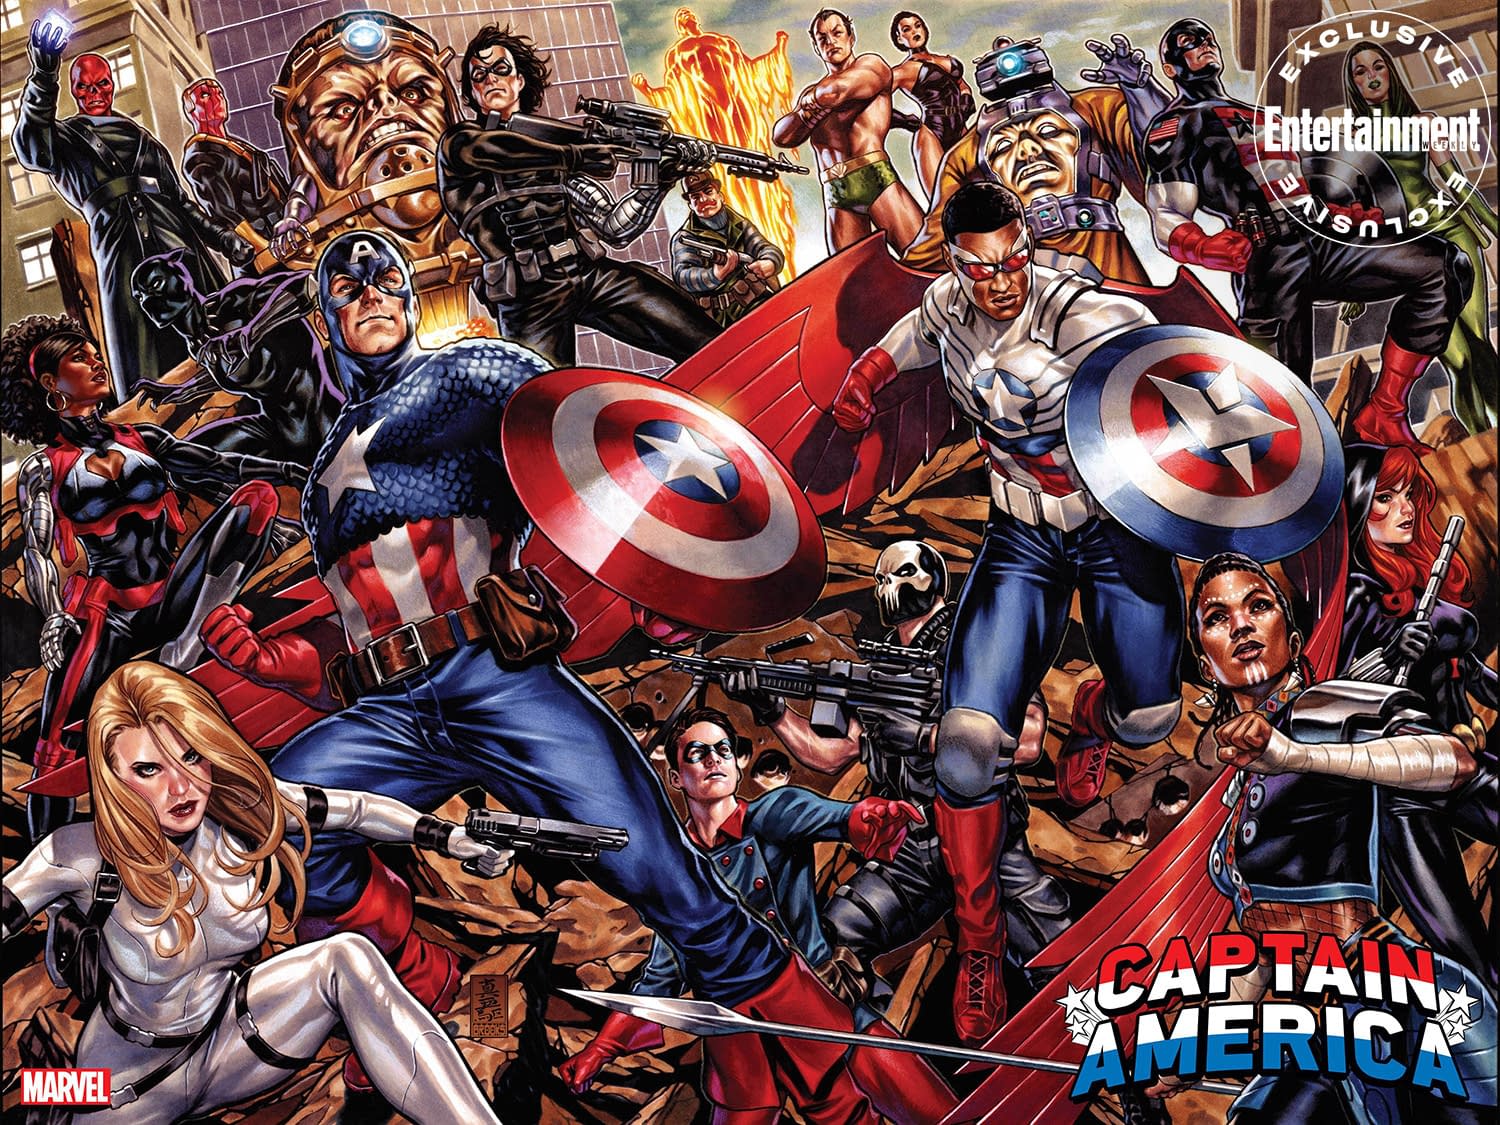 Marvel's Two Captain America Comics To Examine USA, Past And Present